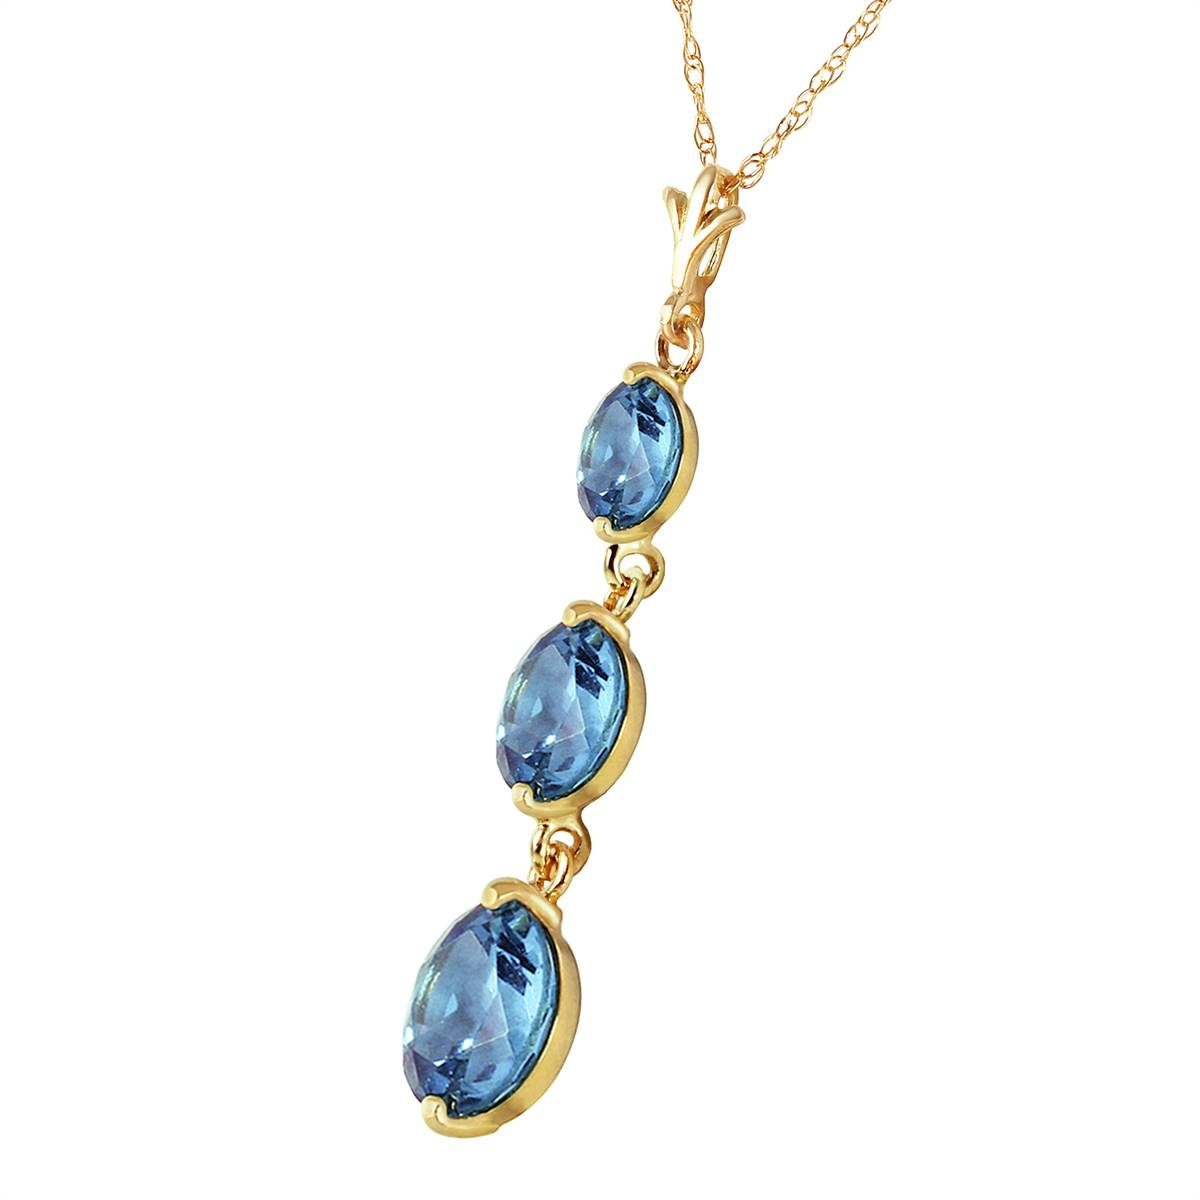 3.6 Carat 14K Solid Yellow Gold Bluejay Blue Topaz Necklace